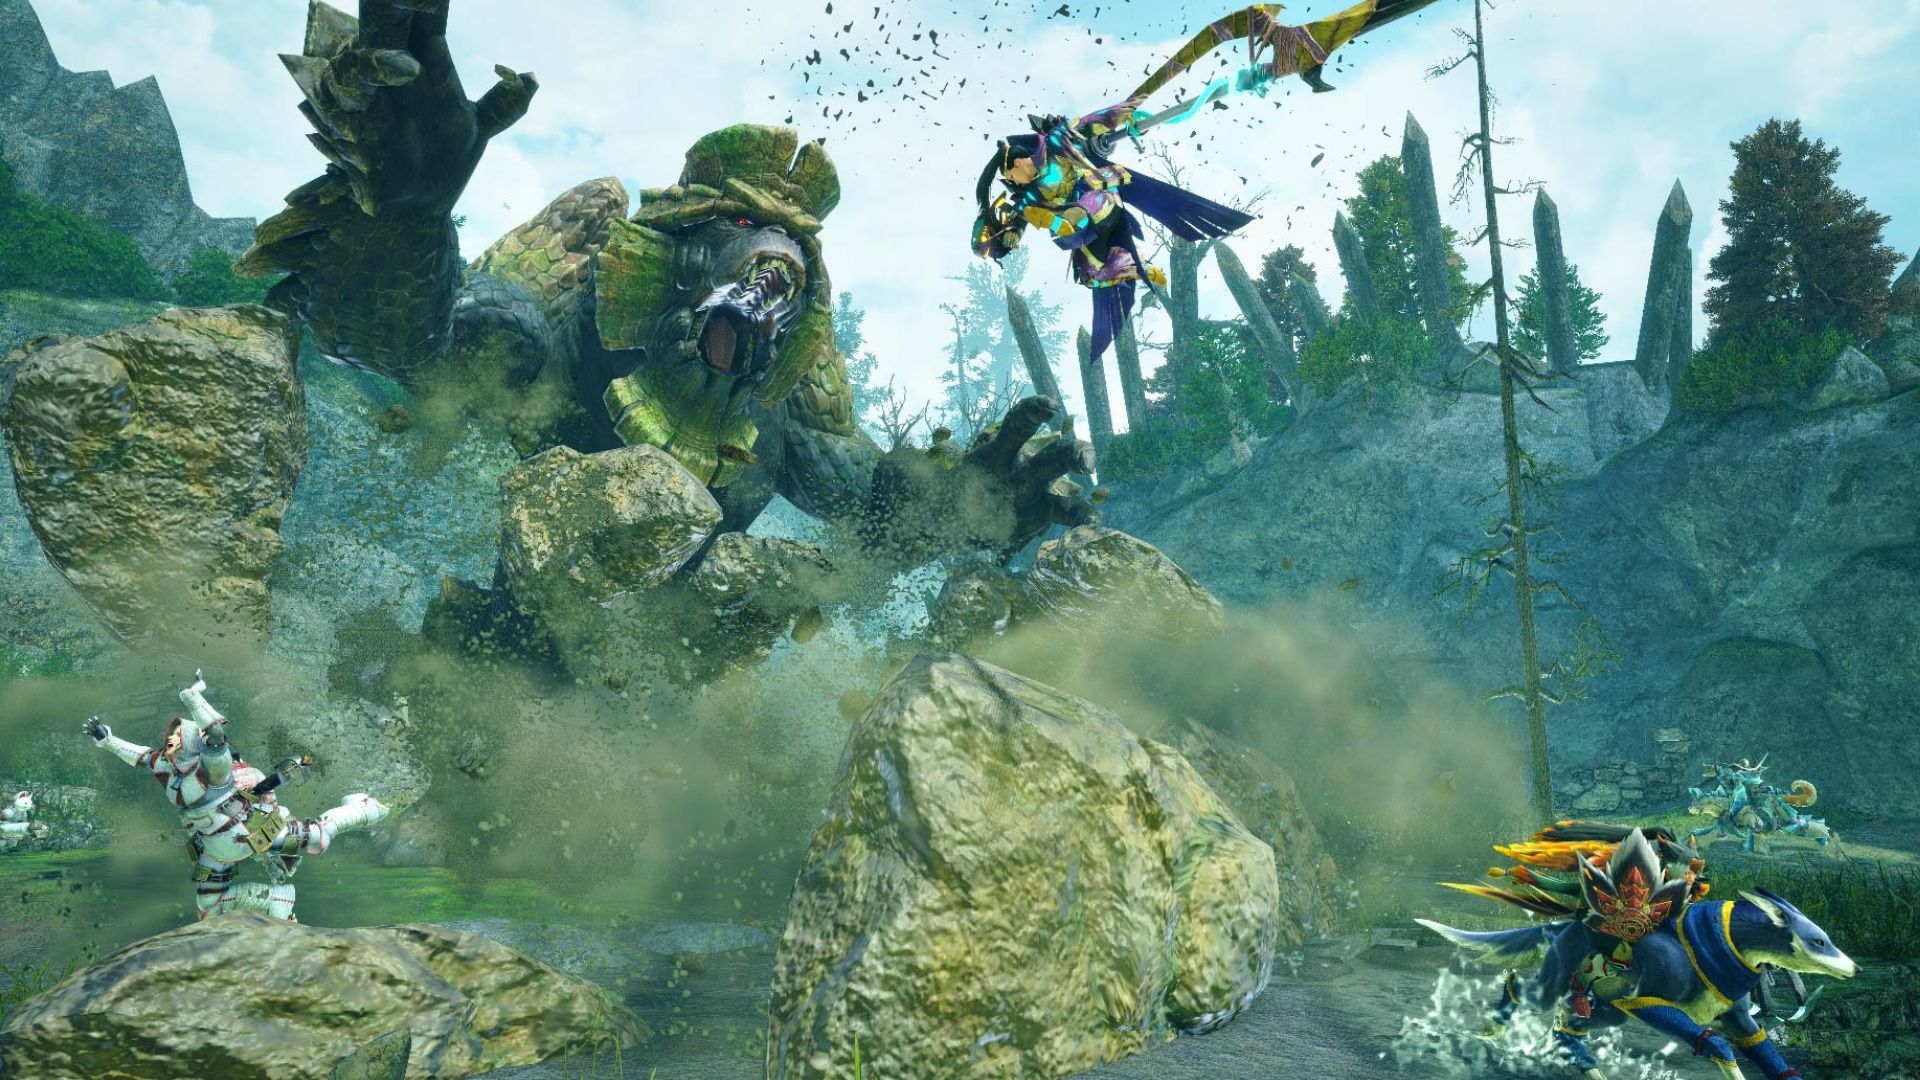 Best monster games: Monster Hunter Rise. Image shows a Garangolm, a giant gorilla-like monster, smashing through the ground, throwing various characters into the air.